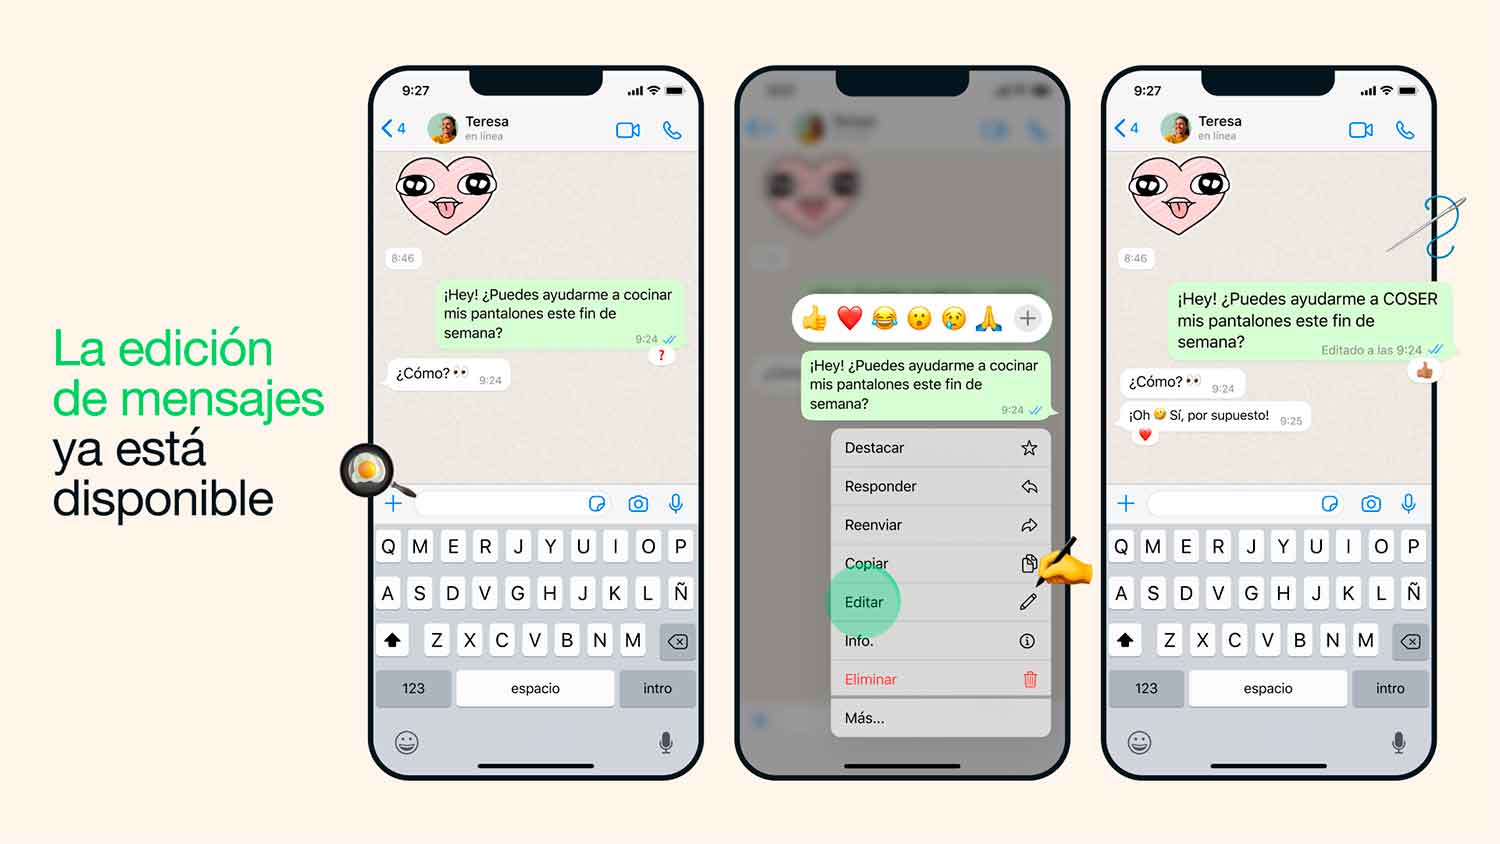 WhatsApp now allows you to edit messages